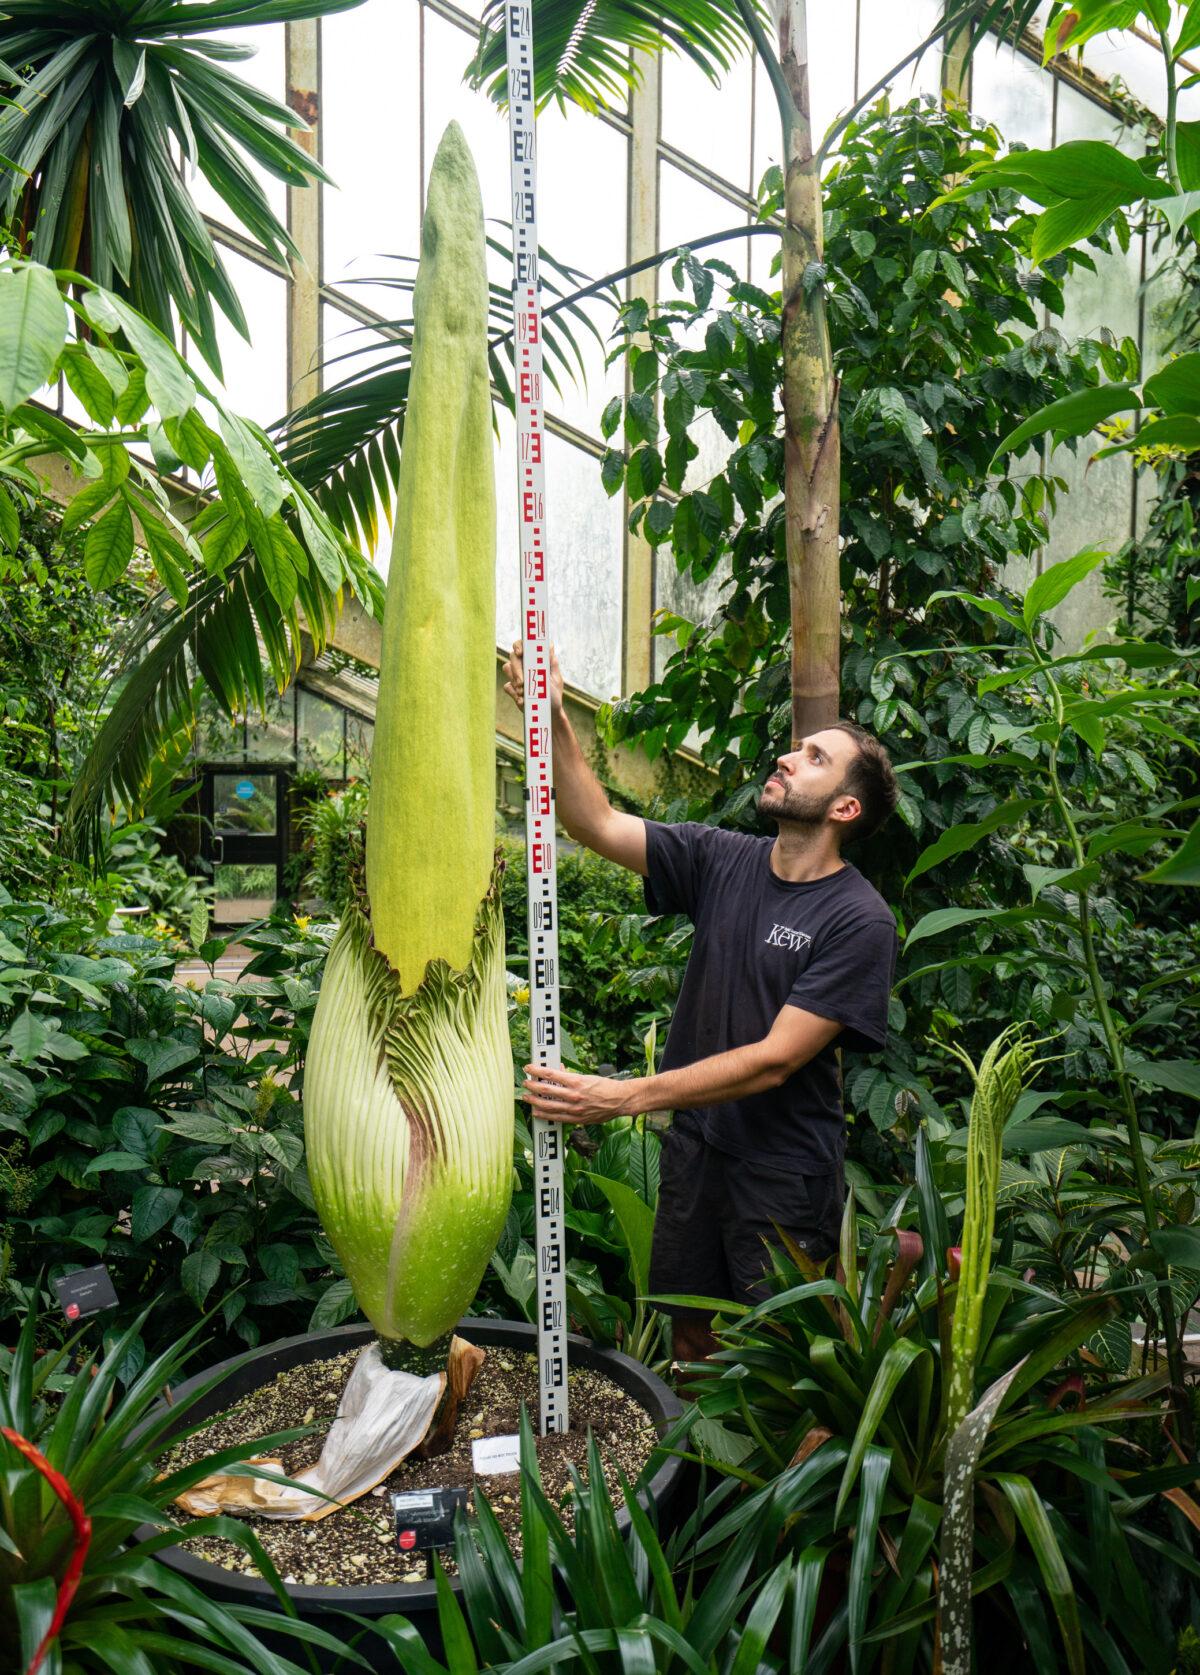 Botanical Horticulturalist Alberto Trinco measures Kew Garden's titan arum, which holds the Guinness world record as the world's tallest bloom, at the Royal Botanic Gardens Kew, in Richmond, on Sept. 15, 2021. (Dominic Lipinski/PA)